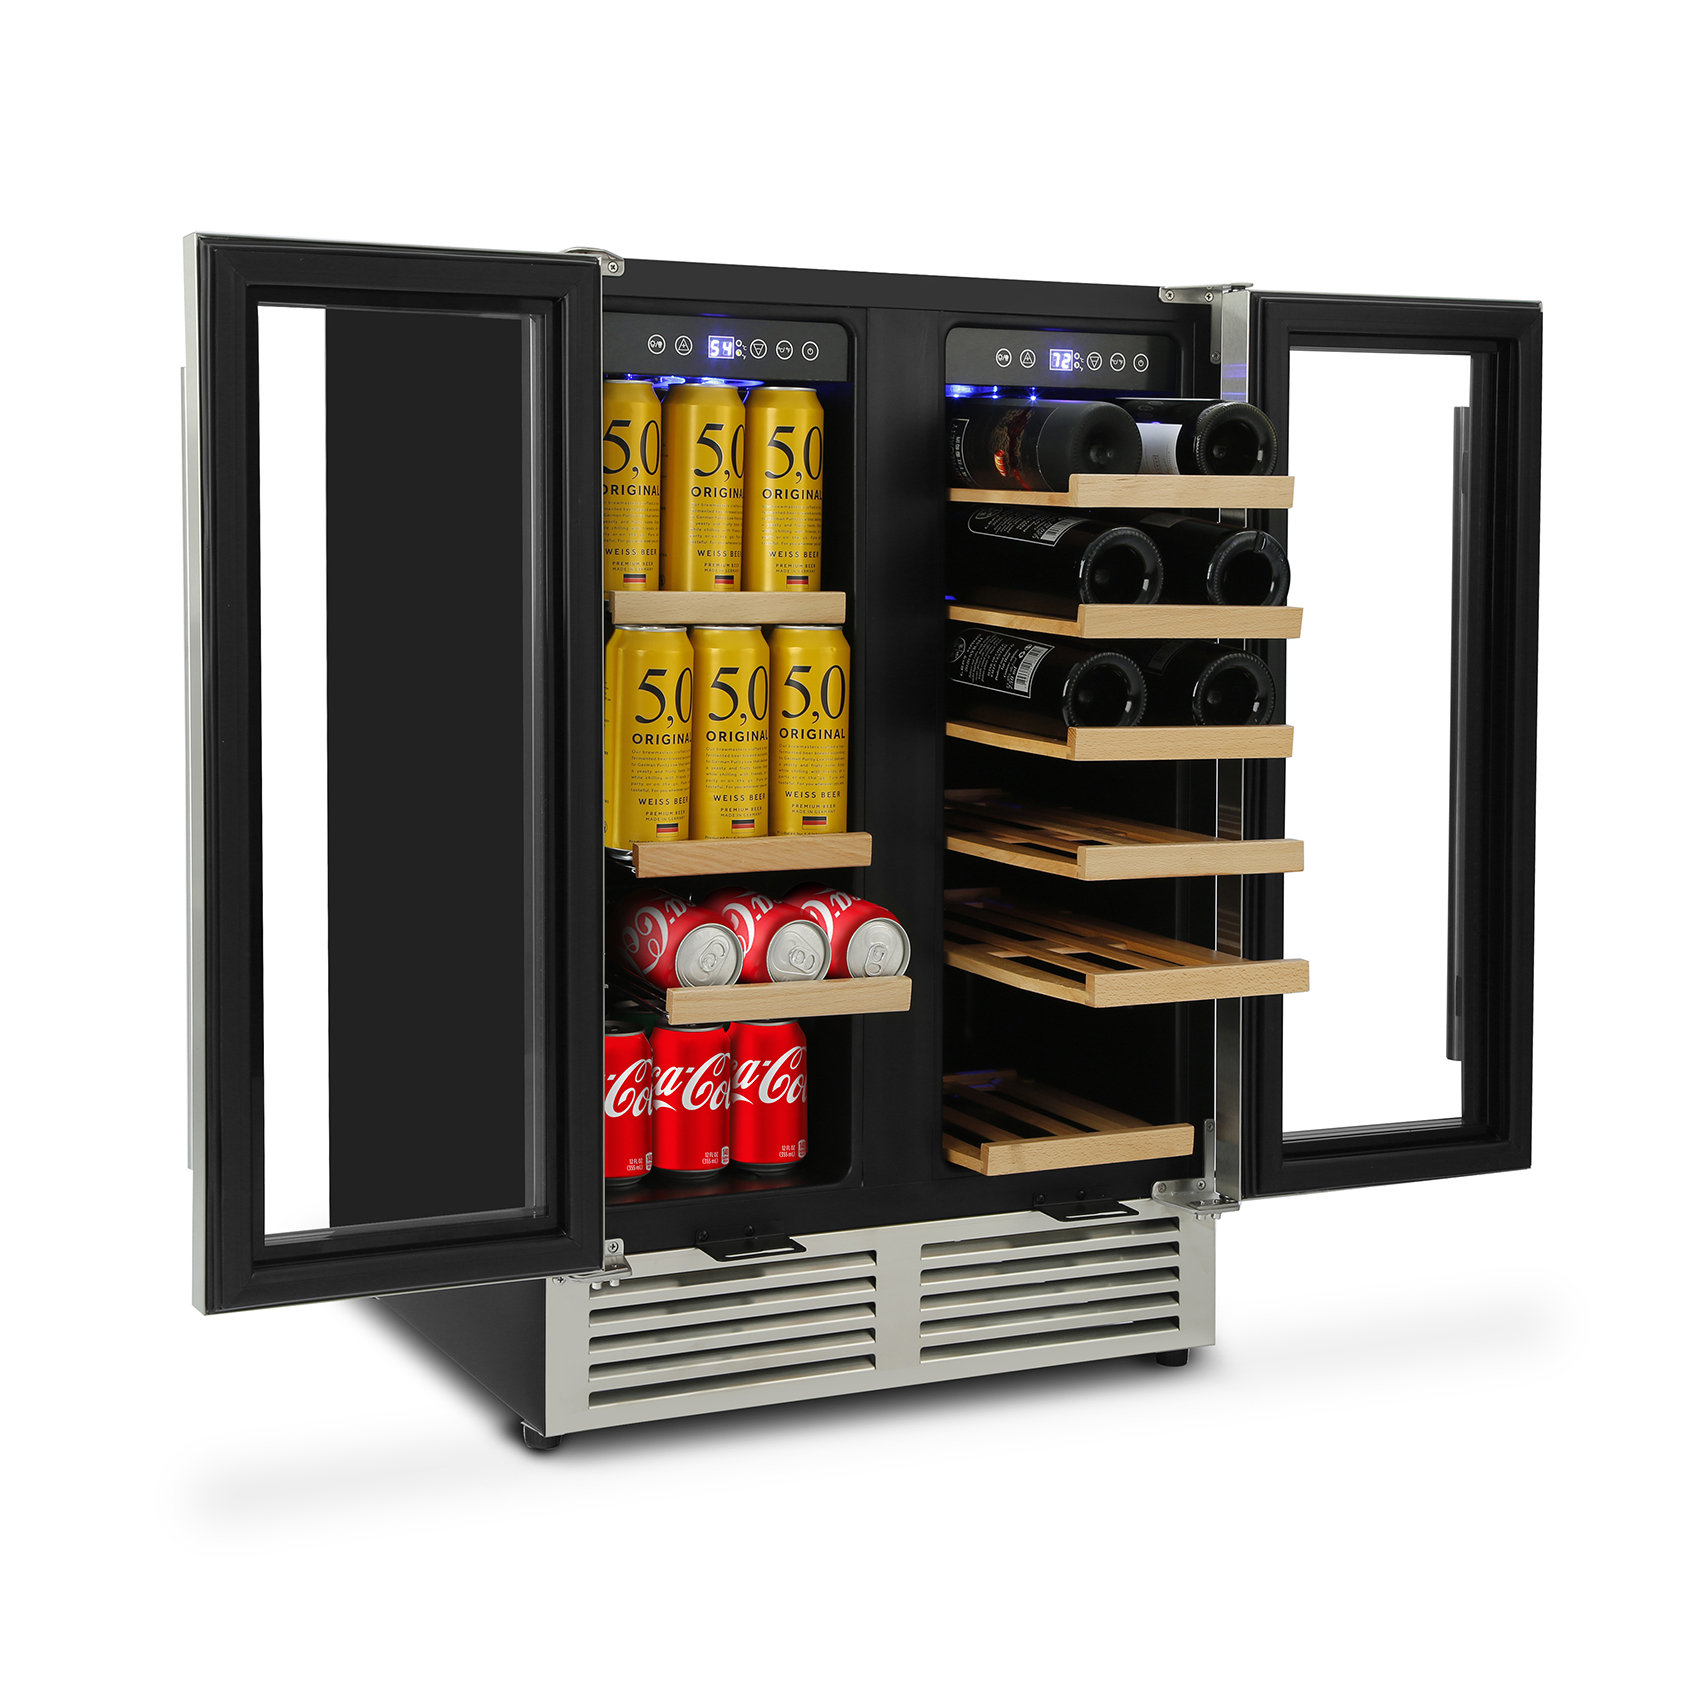 BODEGAcooler 24 Wine and Beverage Cooler Dual Zone 19 Bottles and 57 Cans